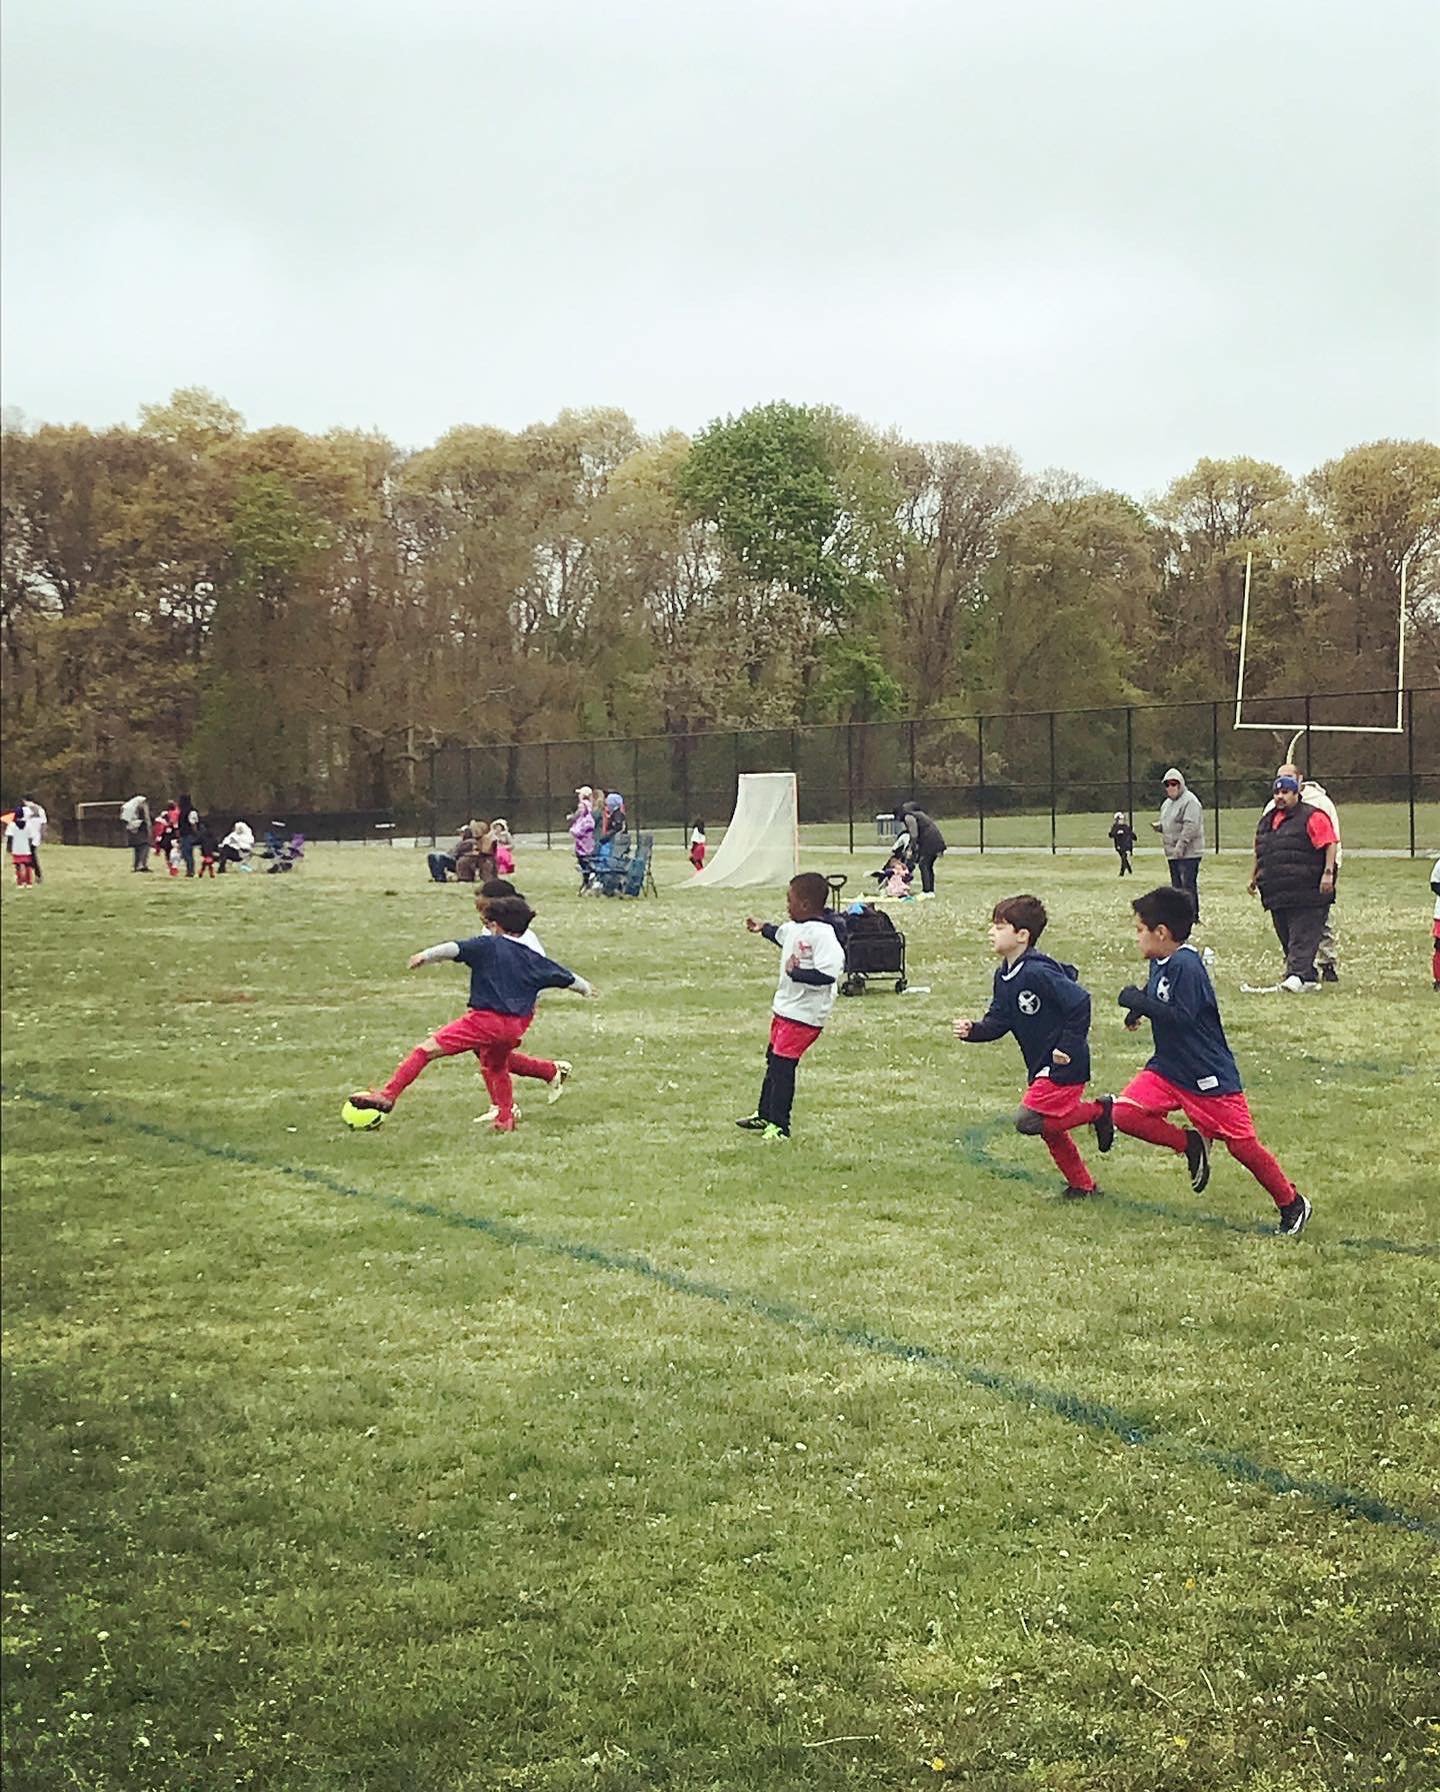 Elliot and his team had such a great game today! Score was 1-1 and everyone did an awesome job. A bit cold but such an exciting game to watch. Go Cardinals ⚽️ #soccer #bellportsoccer #sports #goteam